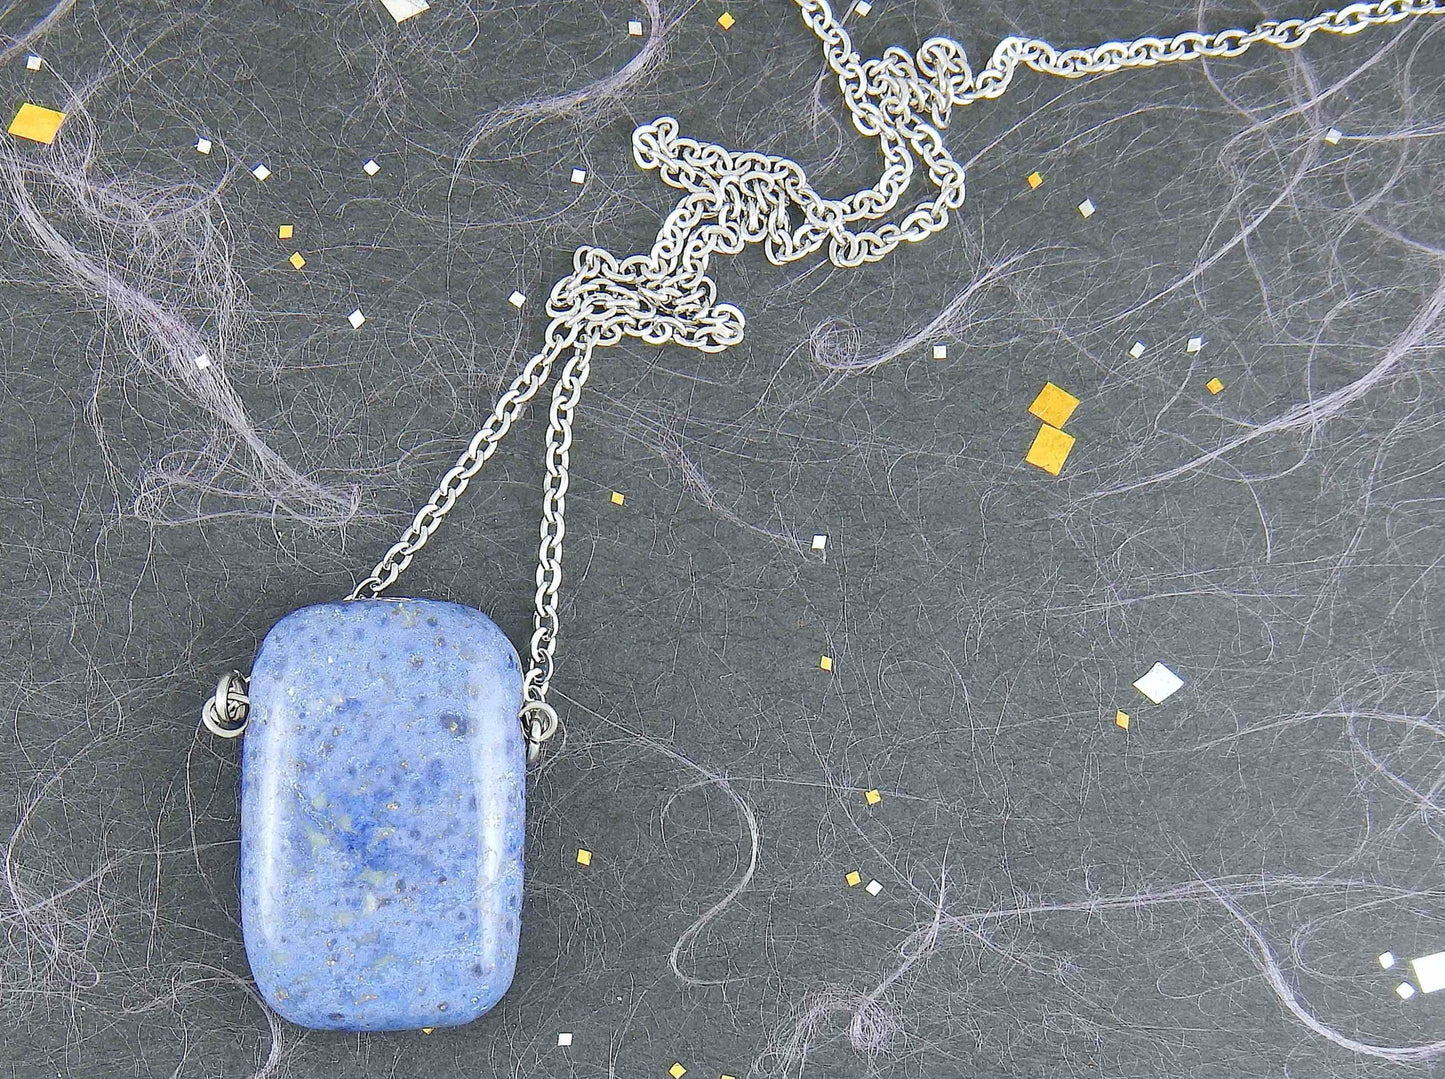 26-inch necklace with rectangular "blue jeans" blue dumortierite stone pendant (a rare stone), stainless steel chain